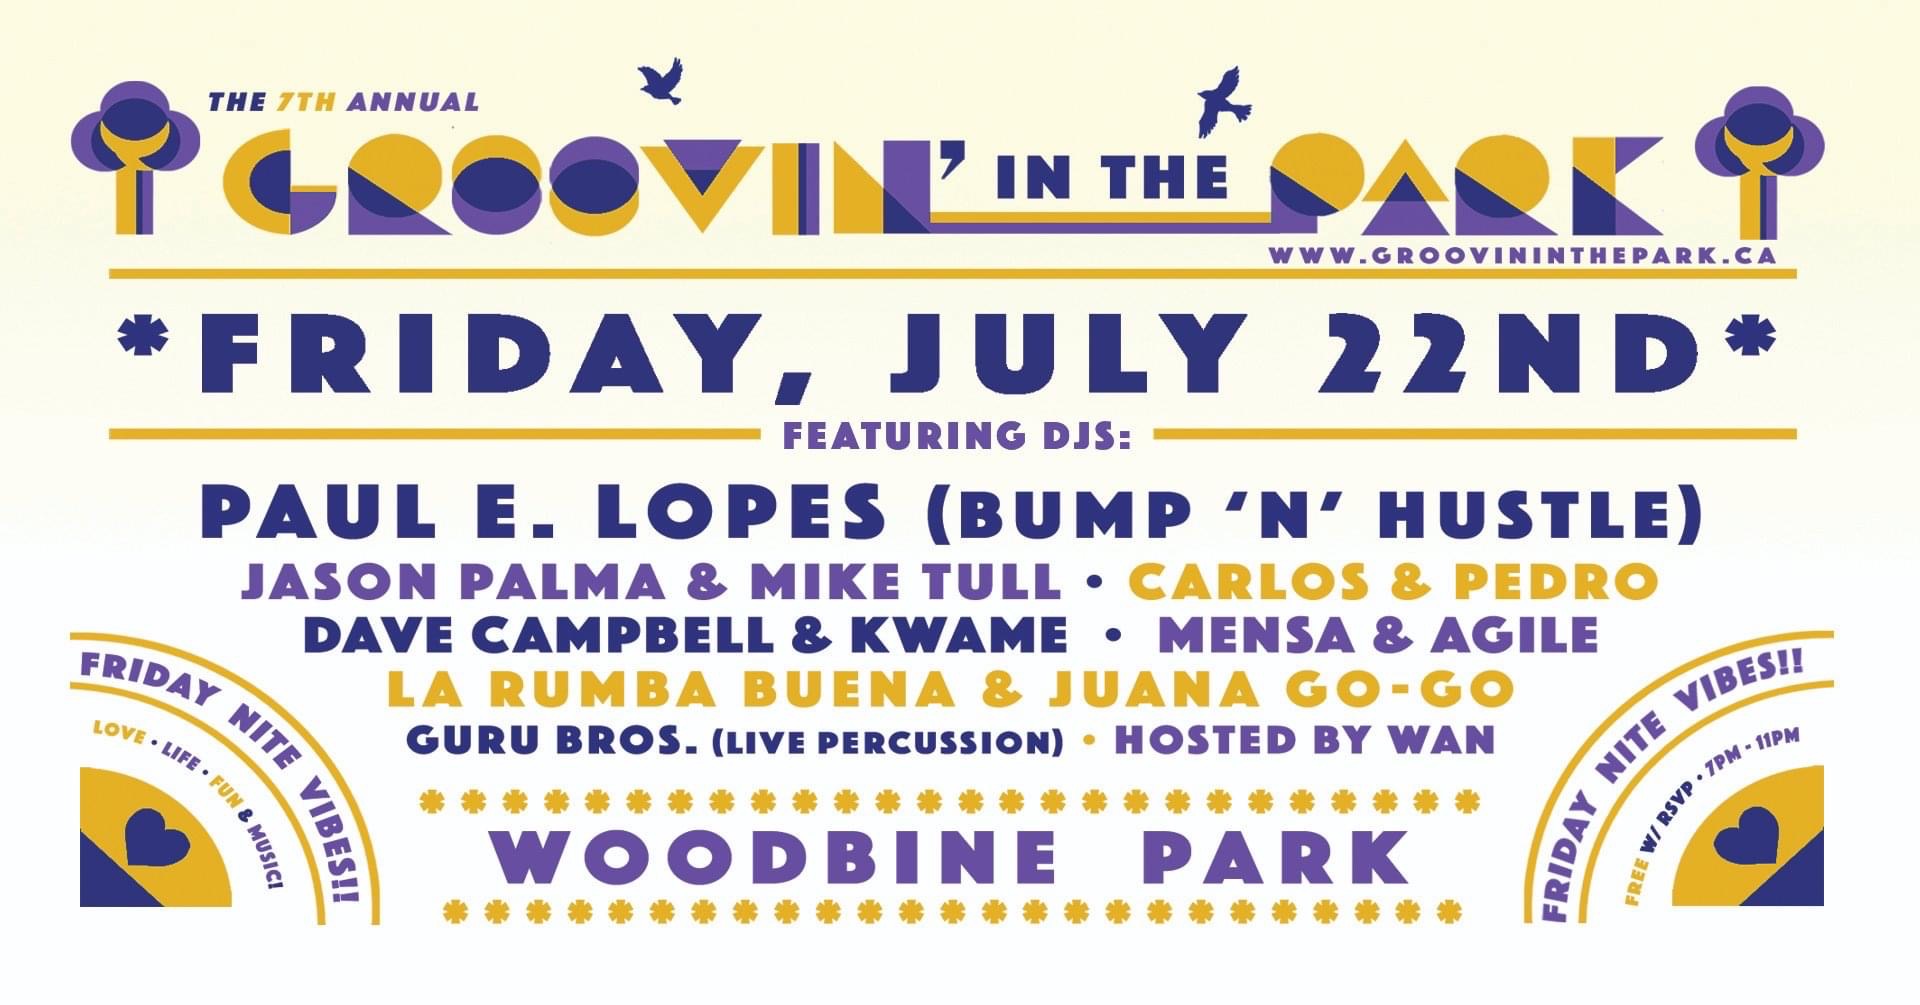 The 7th Annual Groovin’ in the Park at Woodbine Park on Fri, Jul 22nd